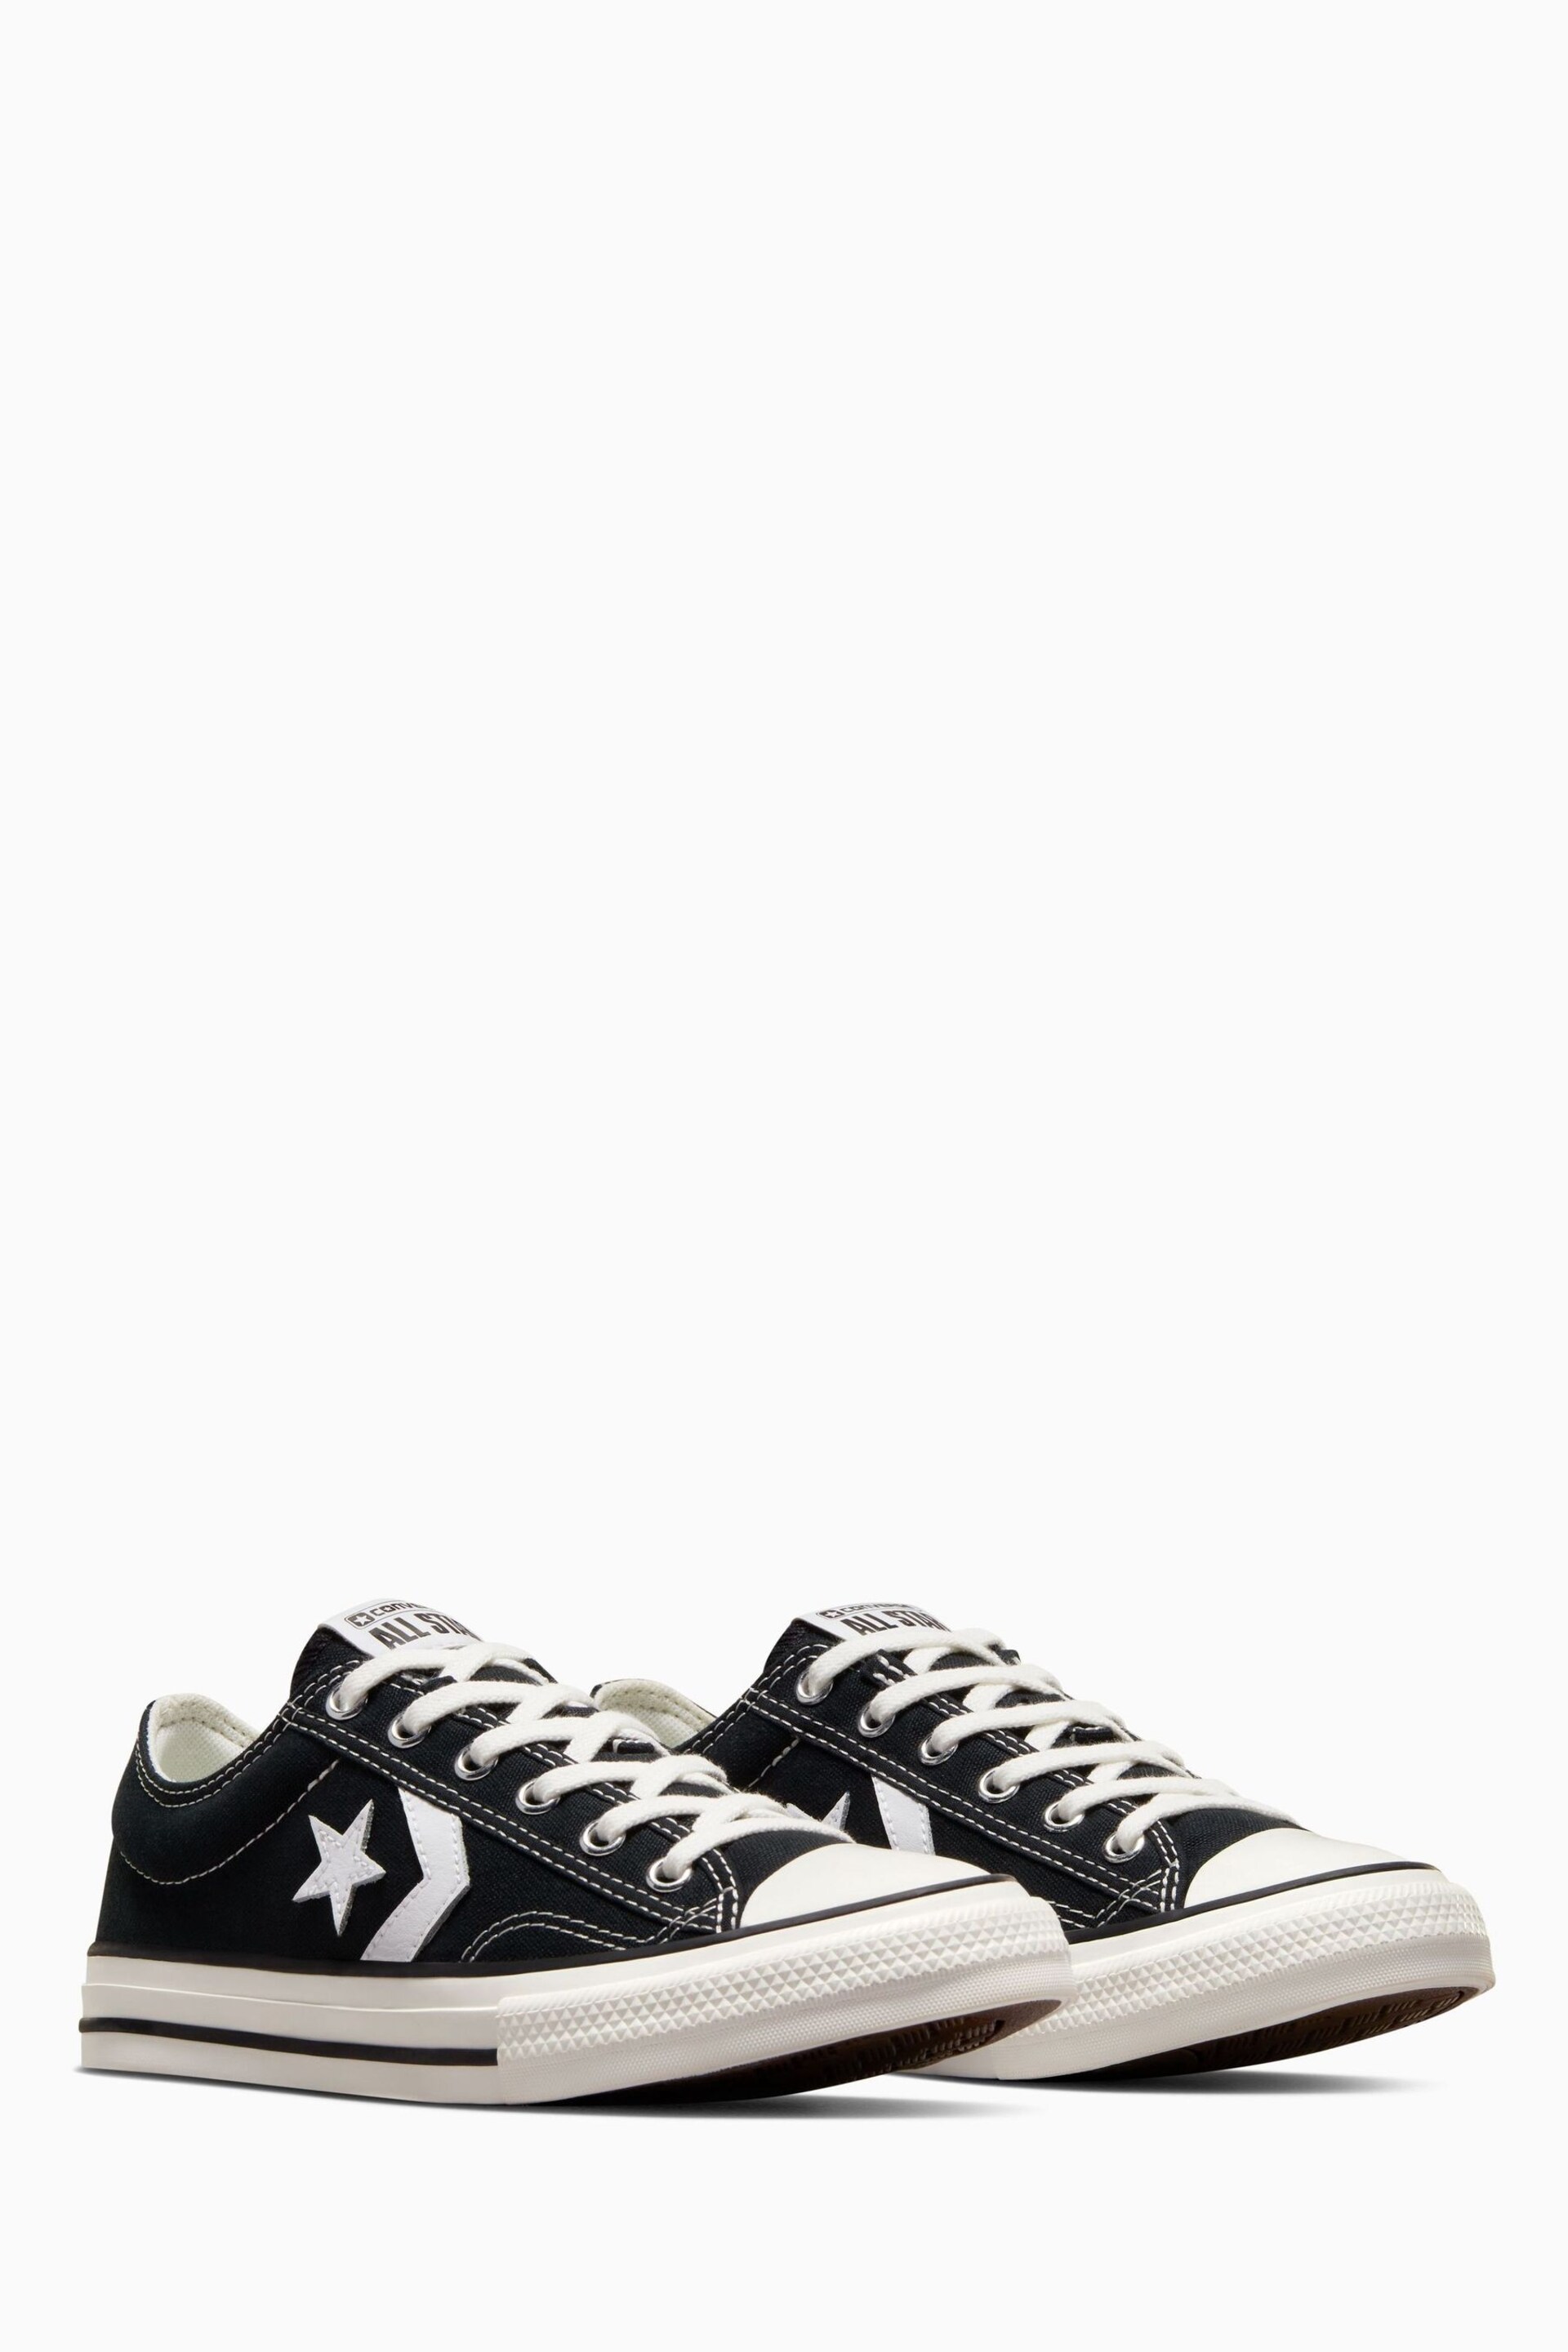 Converse Black Youth Star Player 76 Trainers - Image 3 of 8